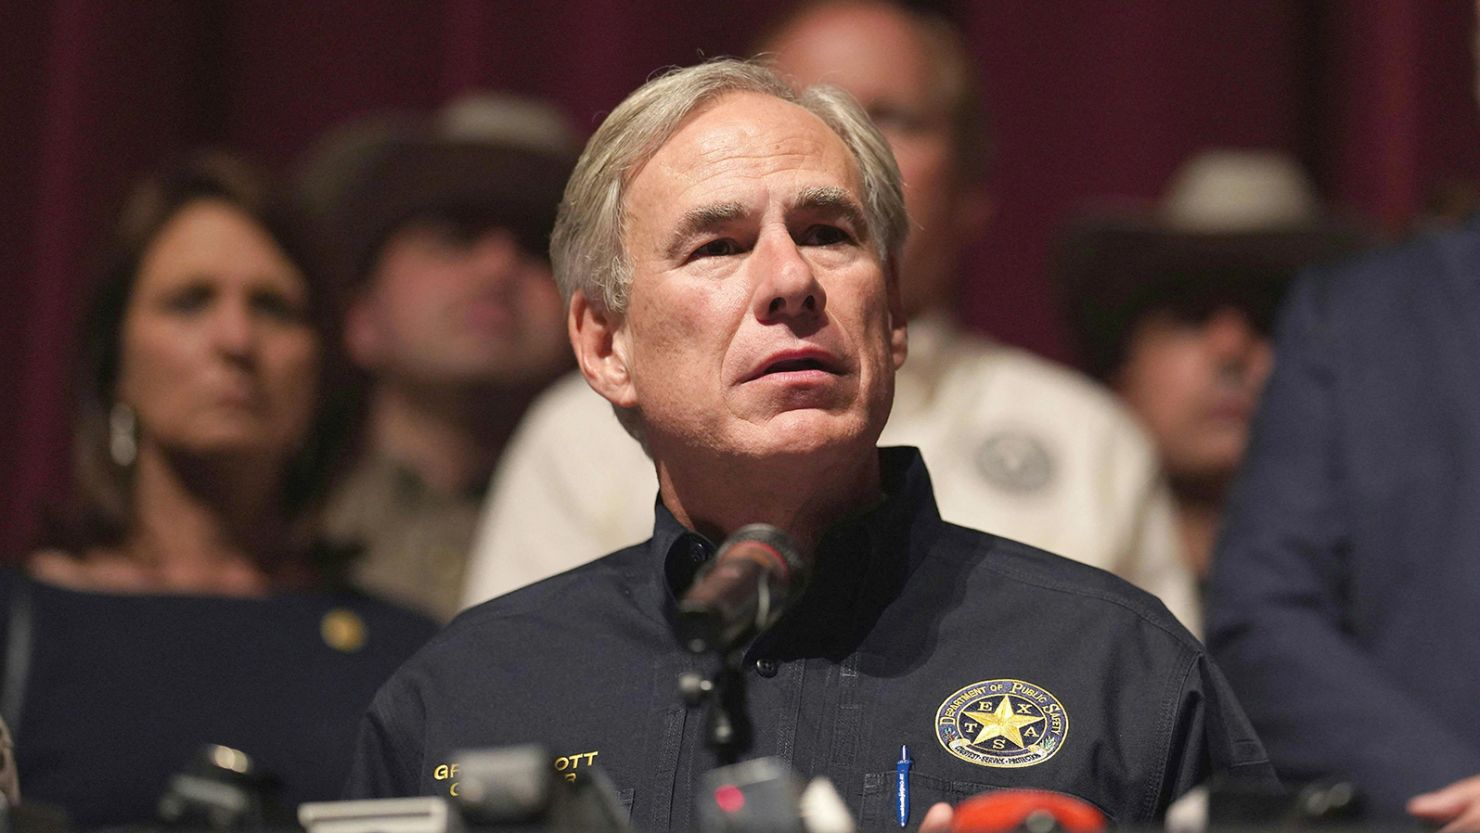 Texas Gov. Greg Abbott at a news conference on May 25, 2022, in Uvalde, Texas.